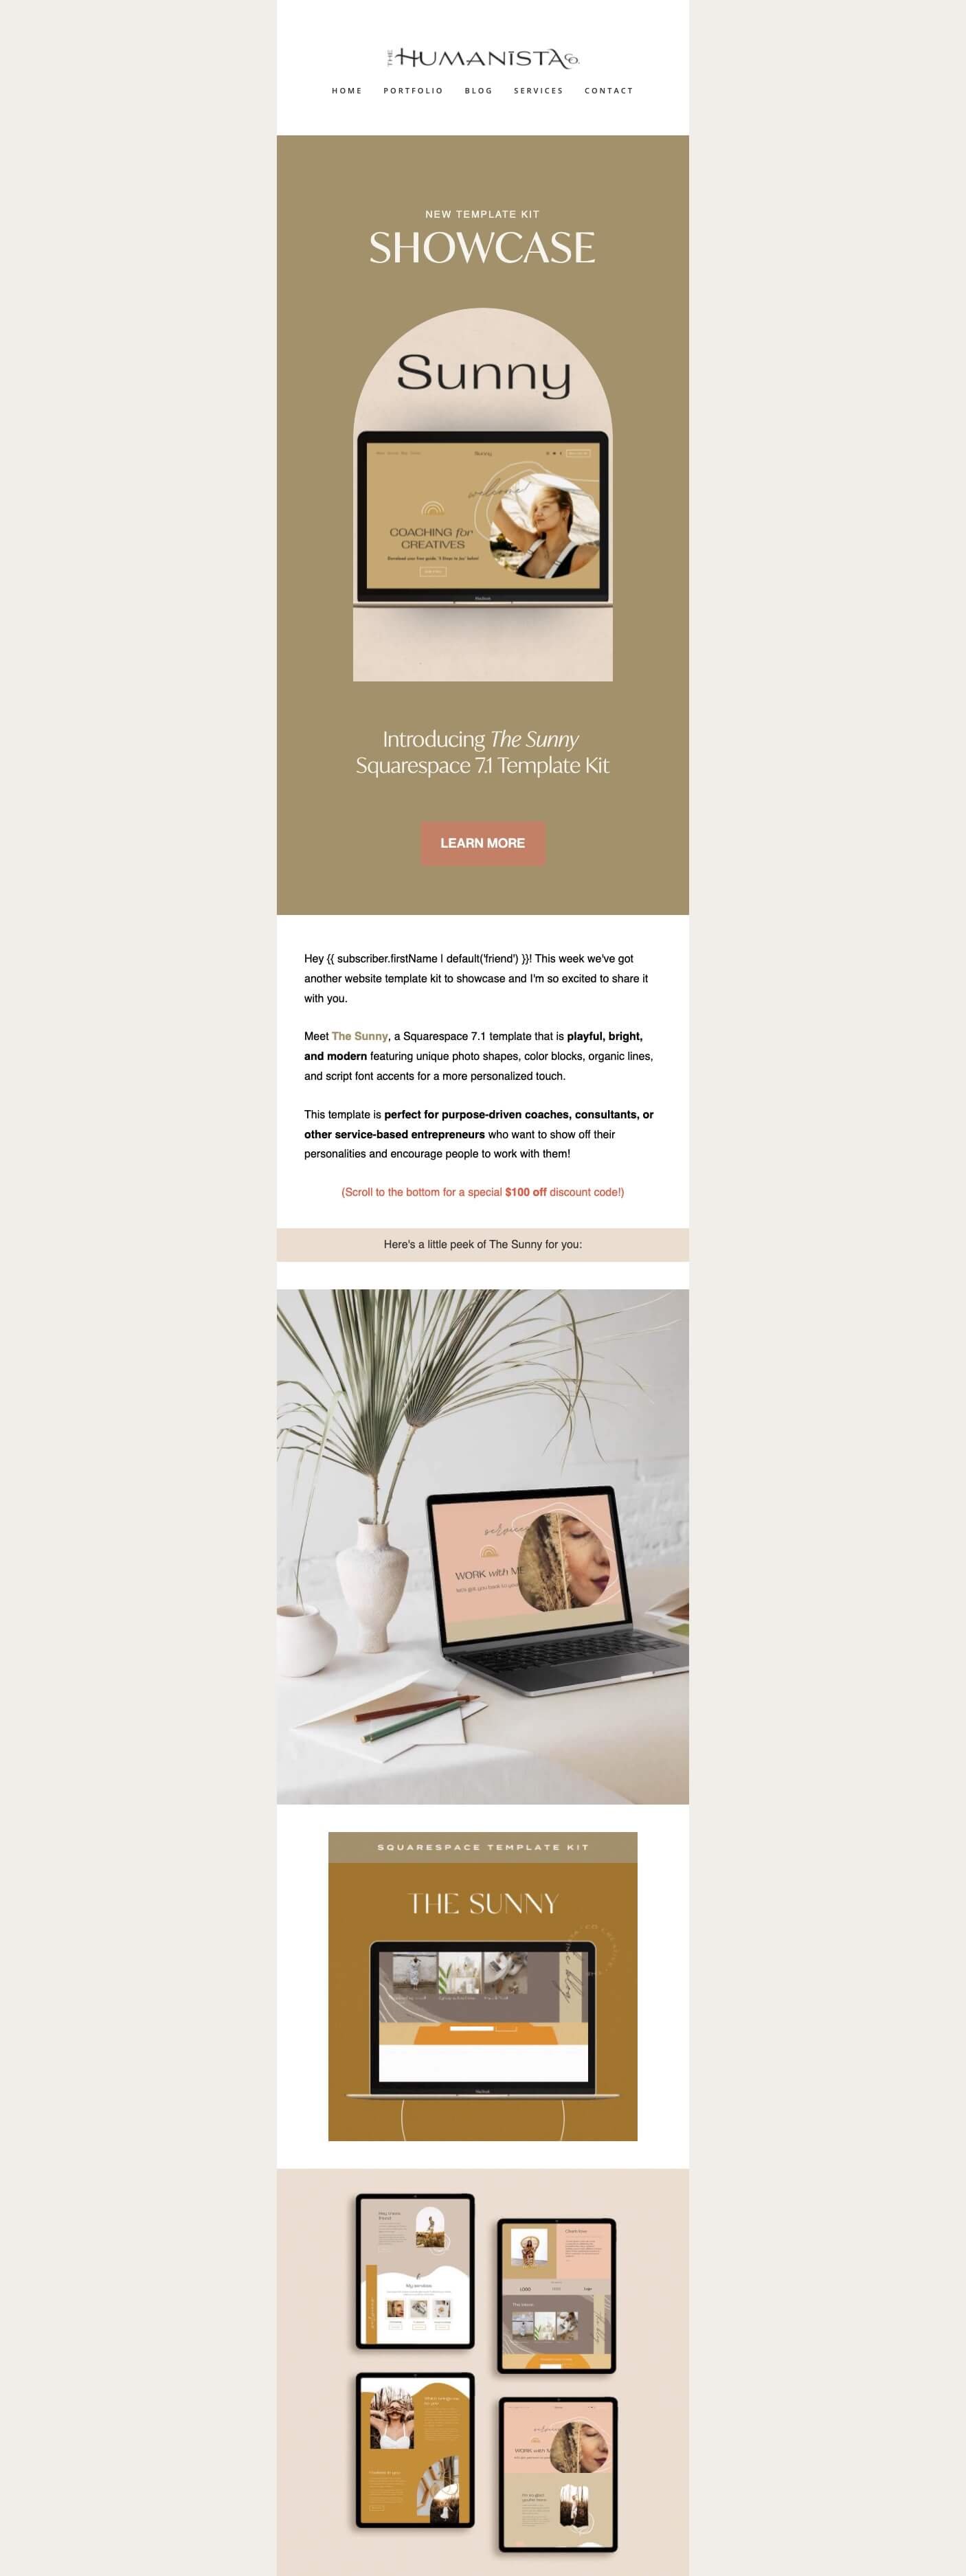 A beautiful Flodesk email design example with boho chic vibes